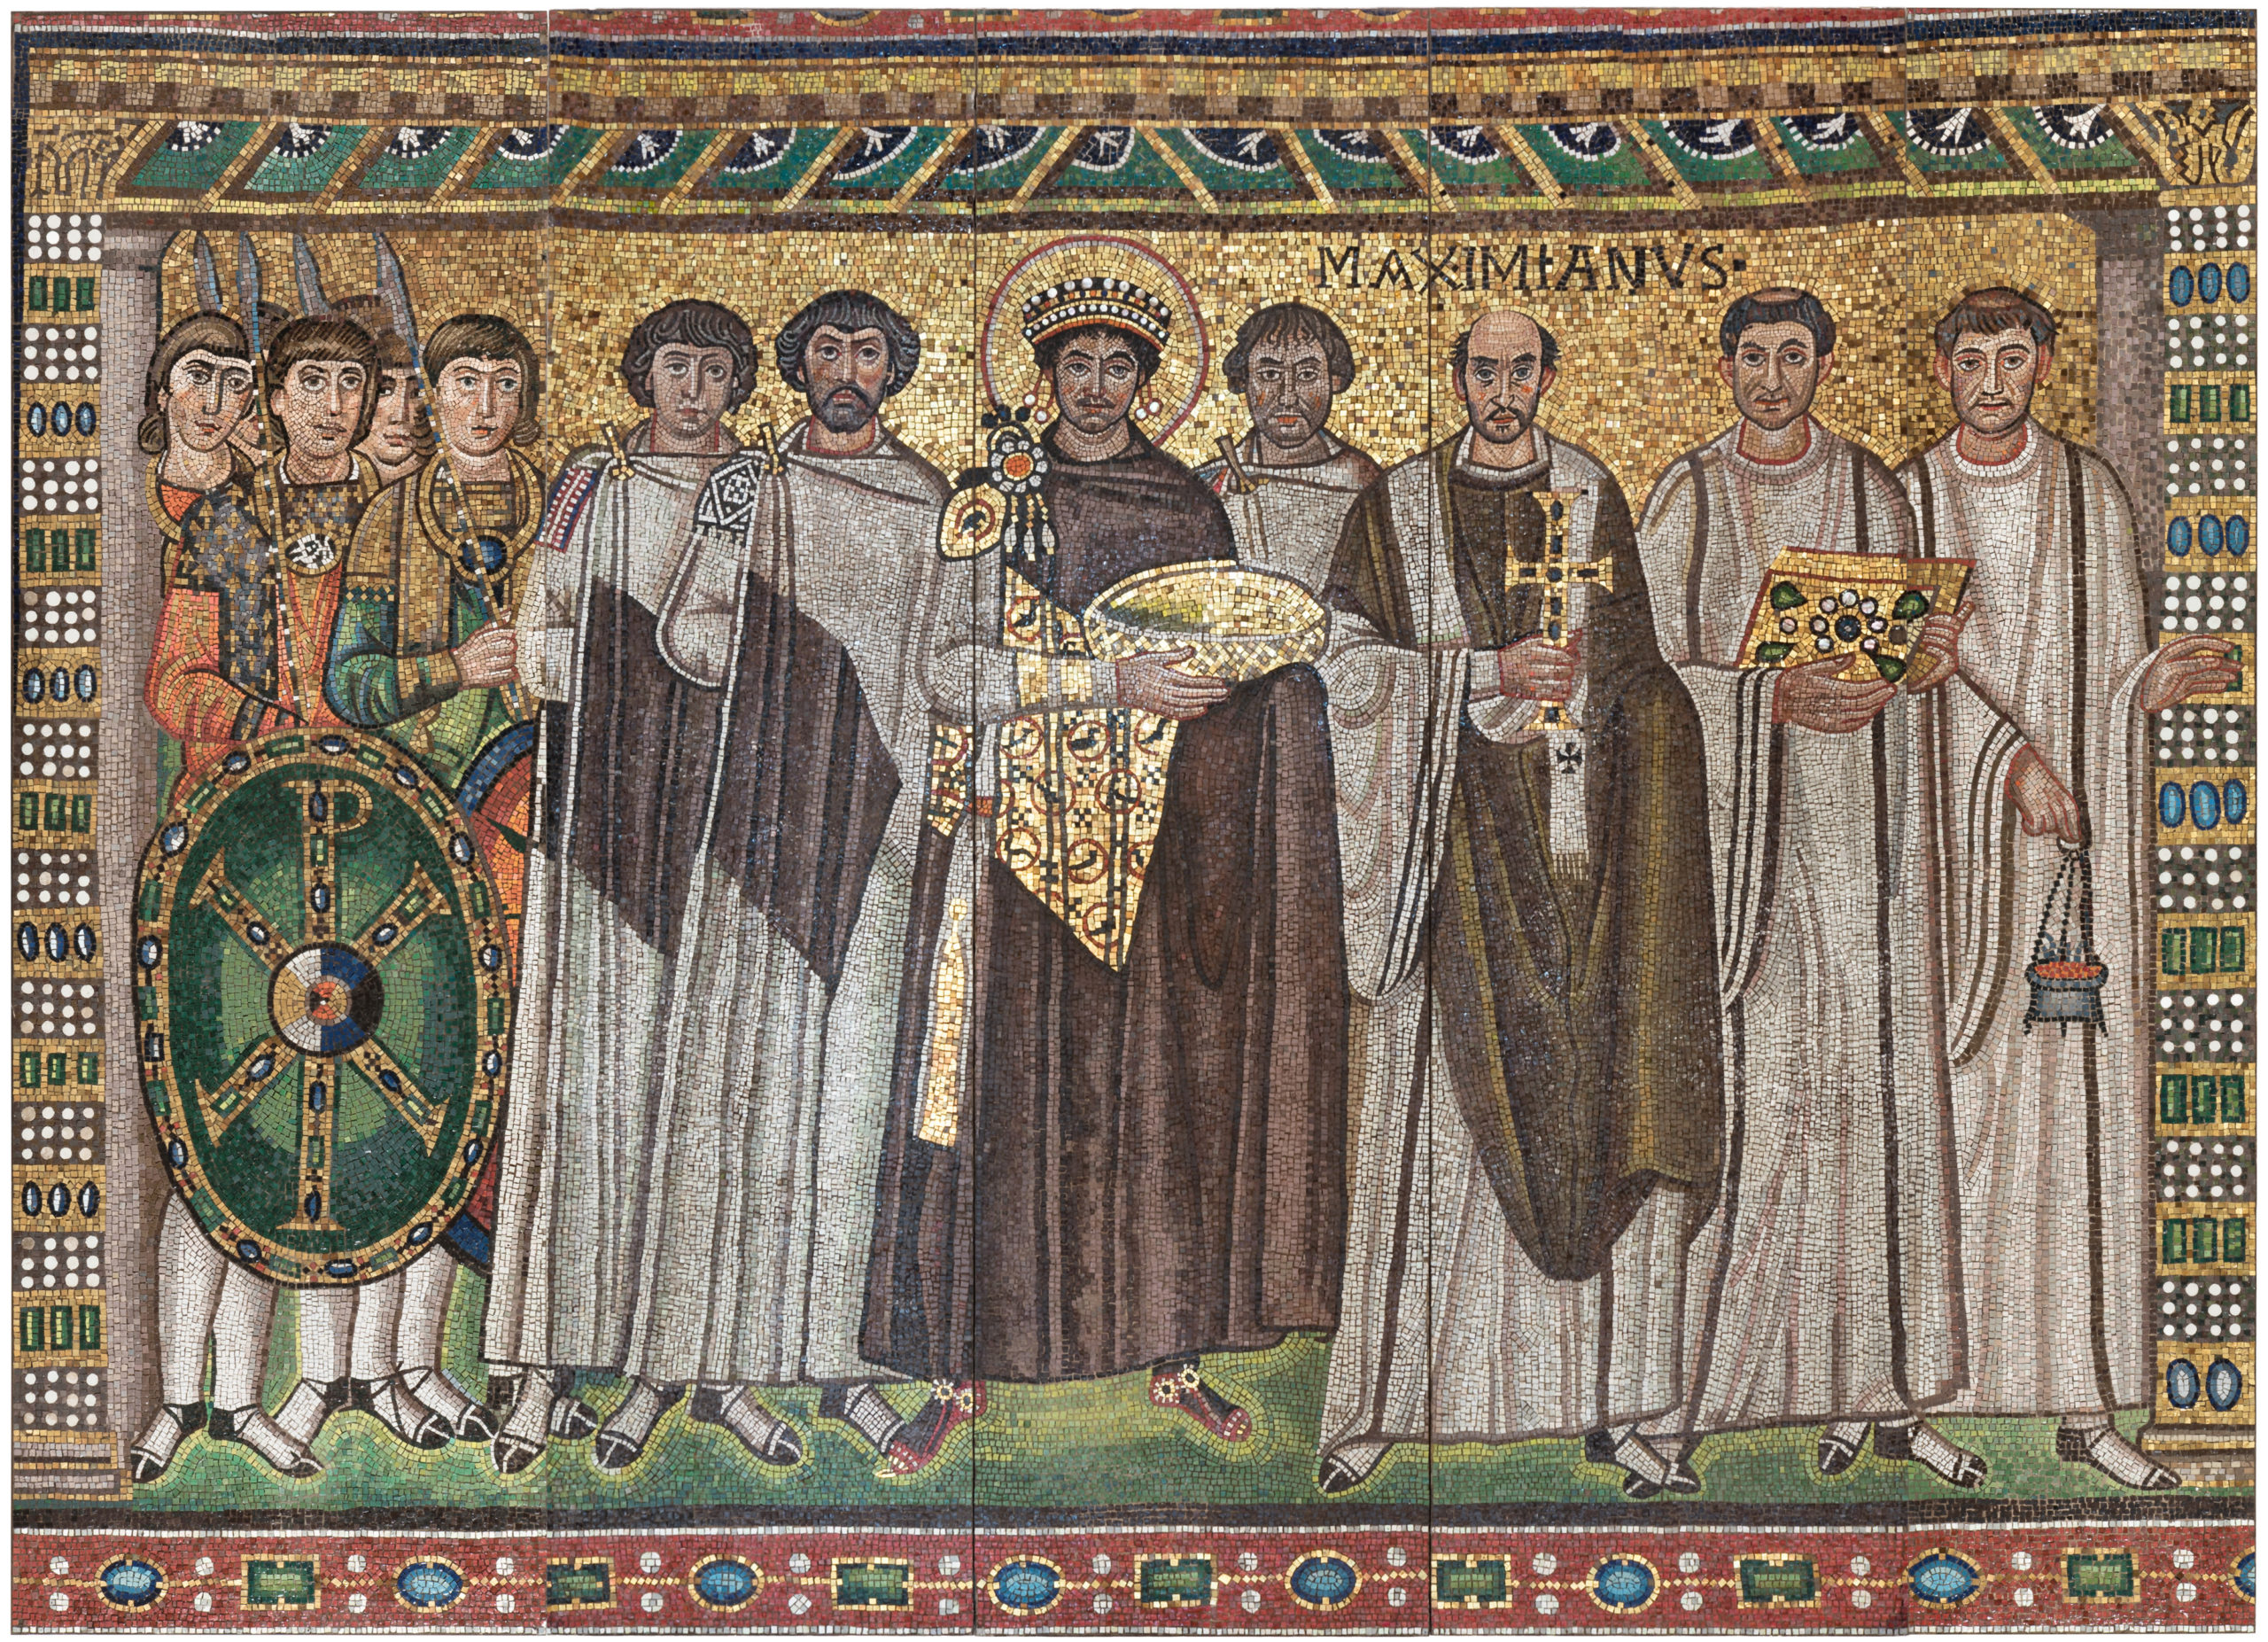 Mosaic of Emperor Justinian, Bishop Maximianus, and attendants.